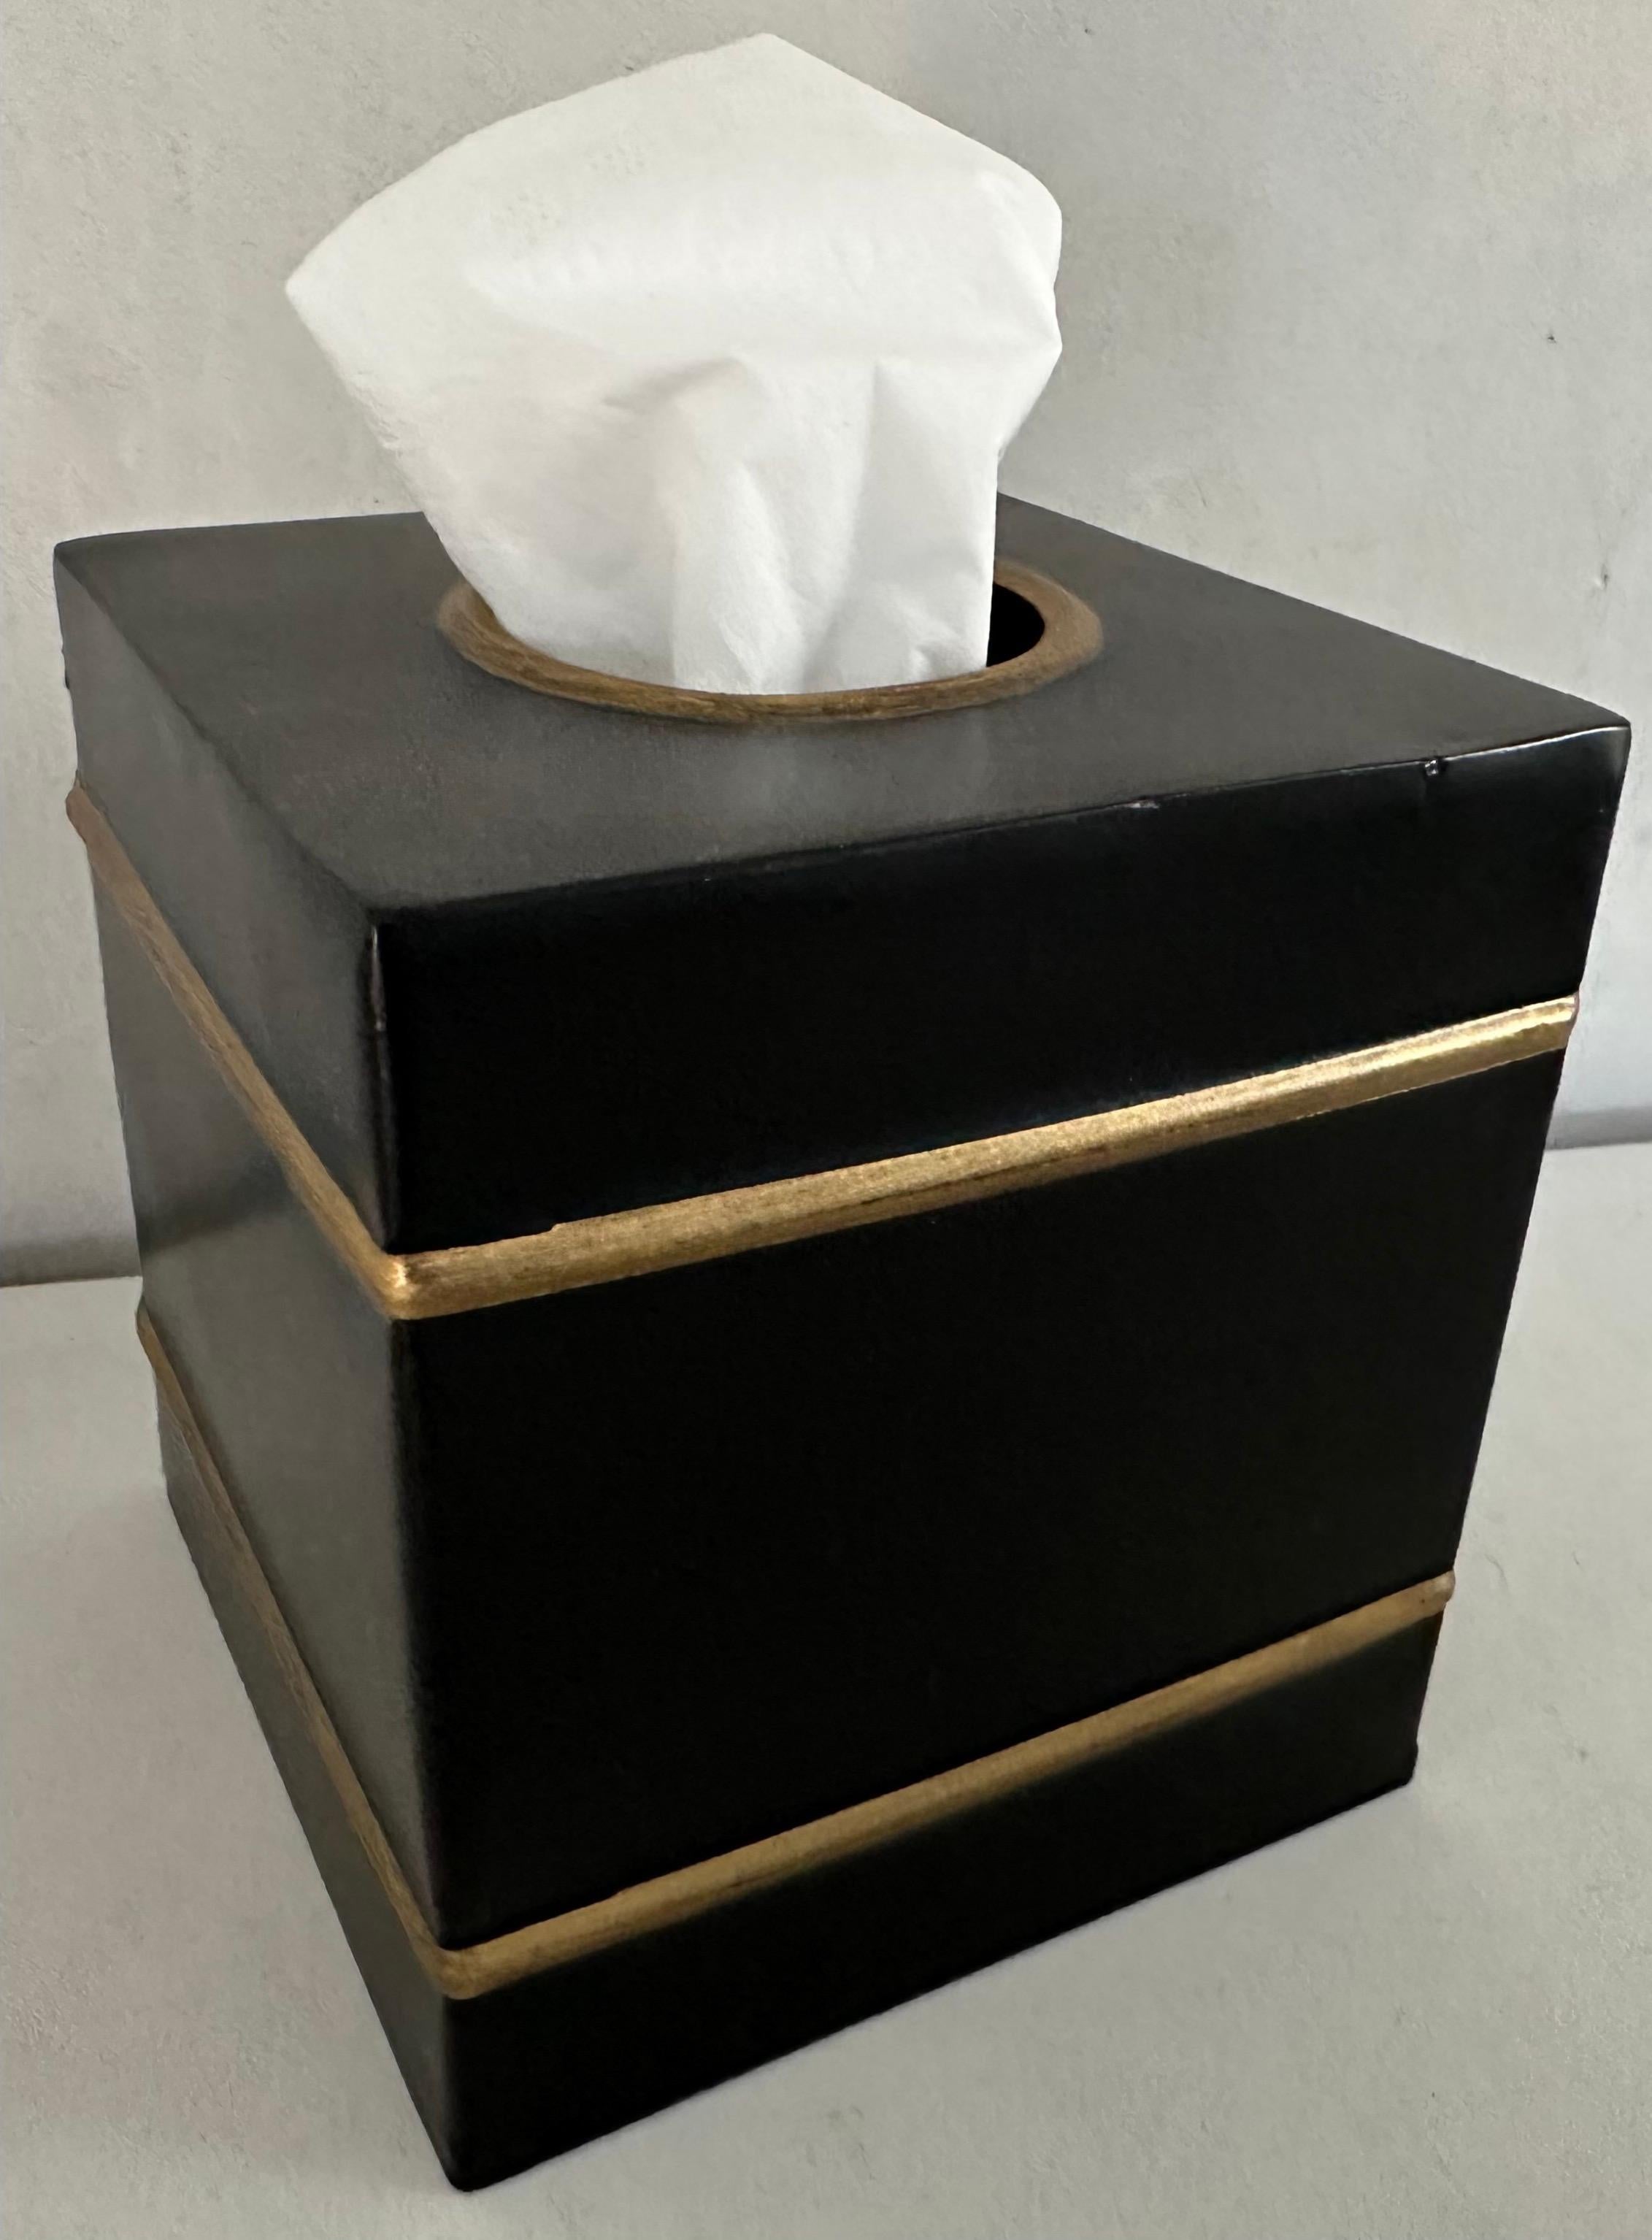 Add a neoclassical touch to your countertop or nightstand with a gold gilt edge, finished in black -- galvanized tissue box cover.  Add fashion and protection for your facial tissue. Enhance the old fashioned feel of your bathroom by adding a